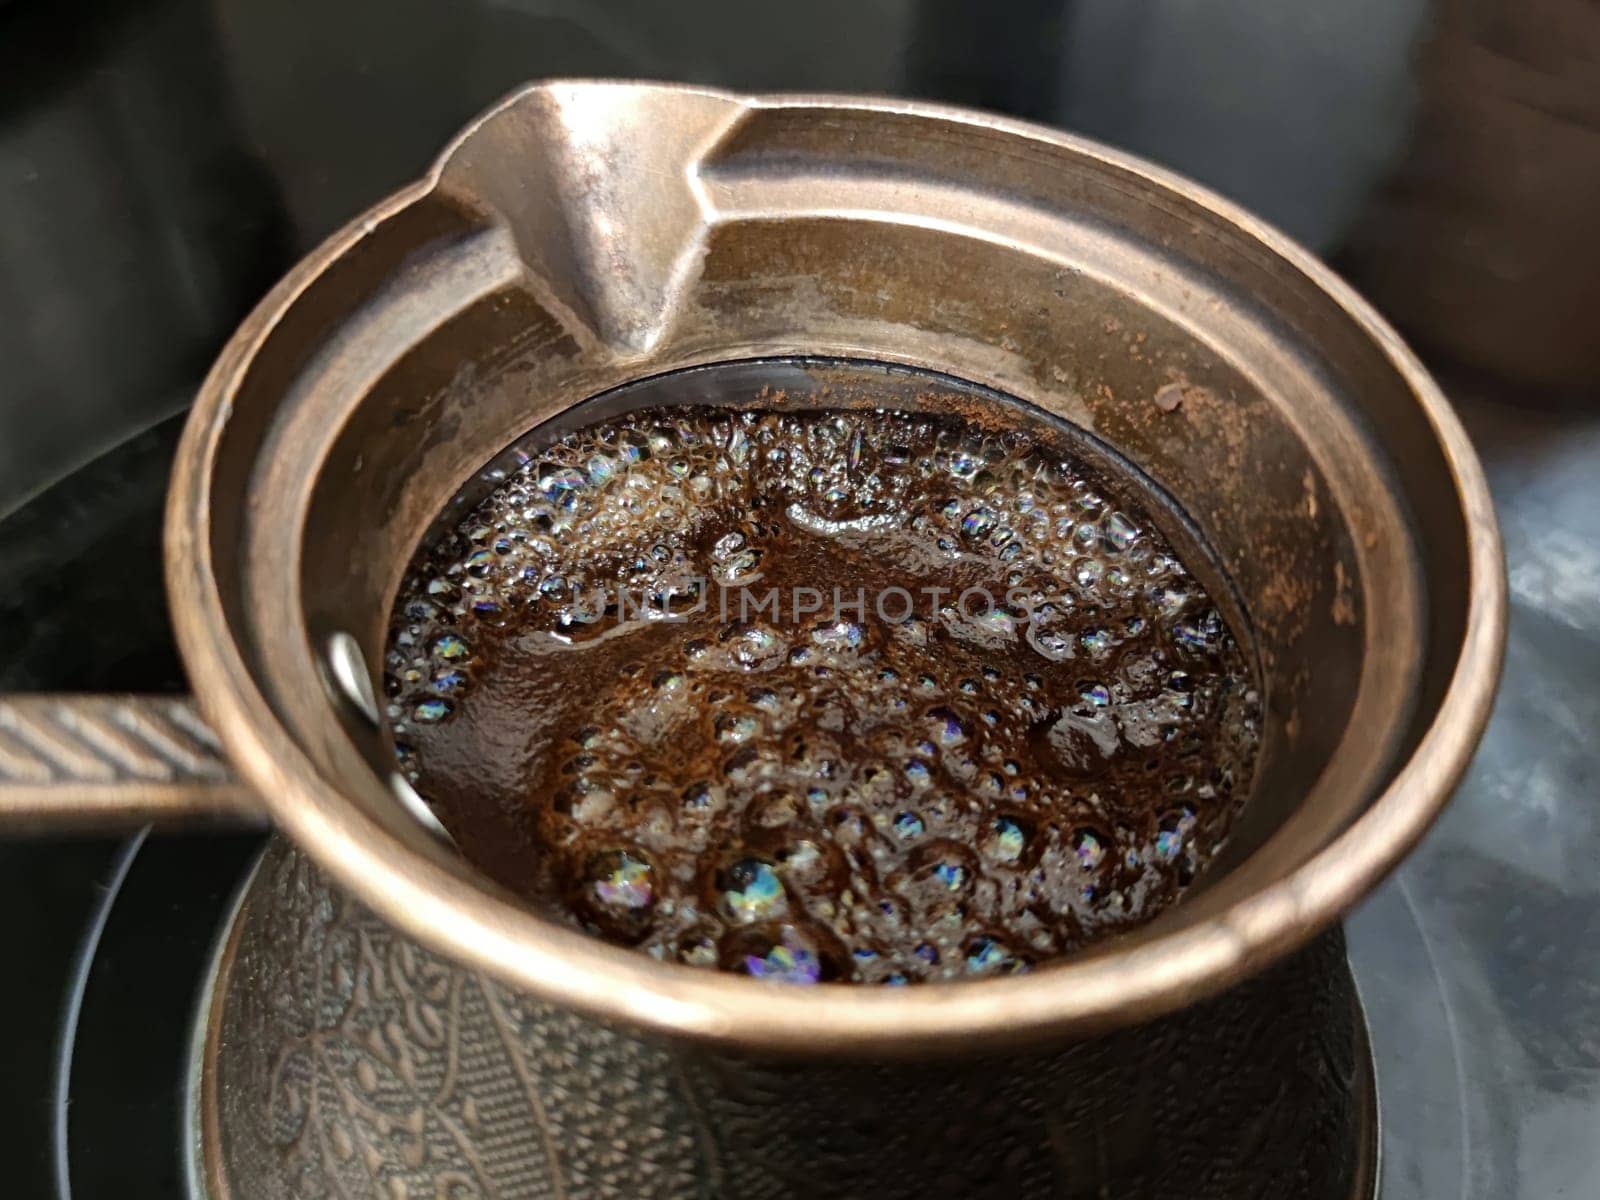 boiling black coffee in a cezve close up